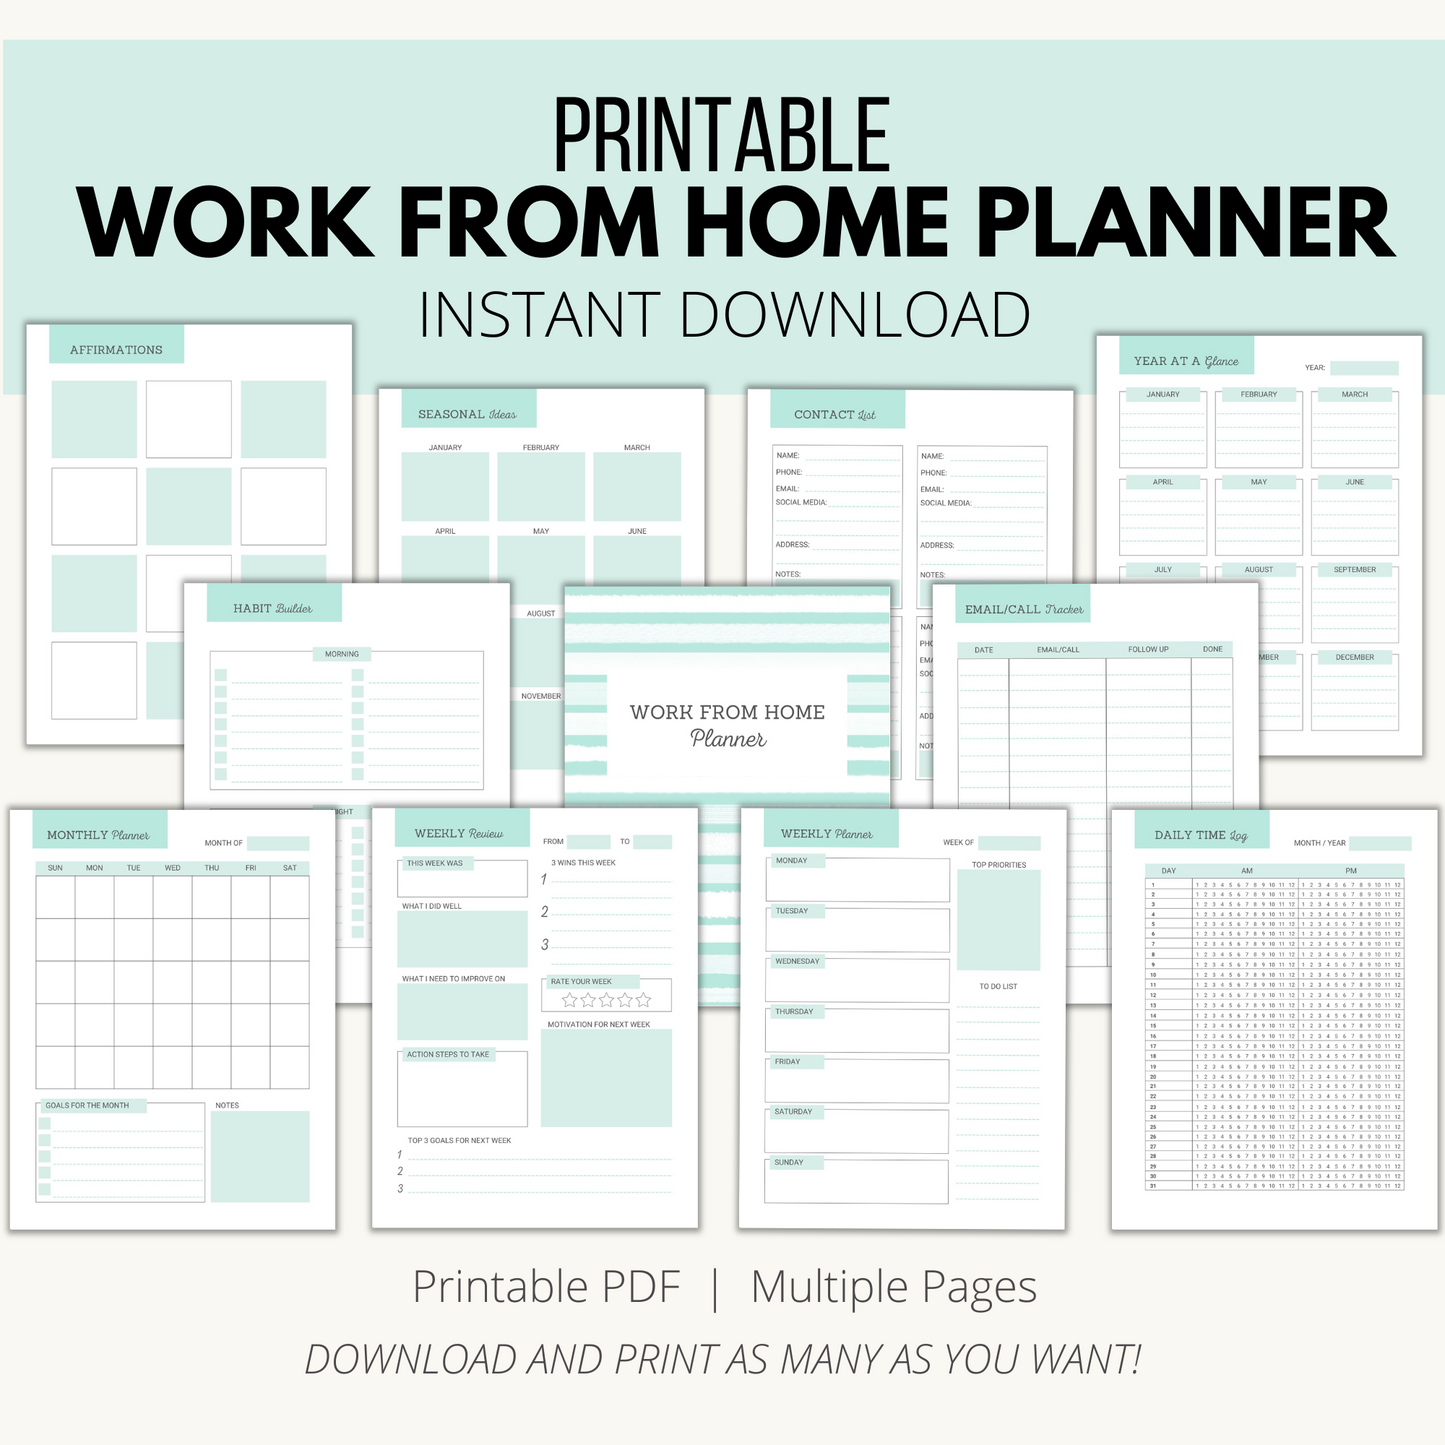 Printable Work From Home Planner